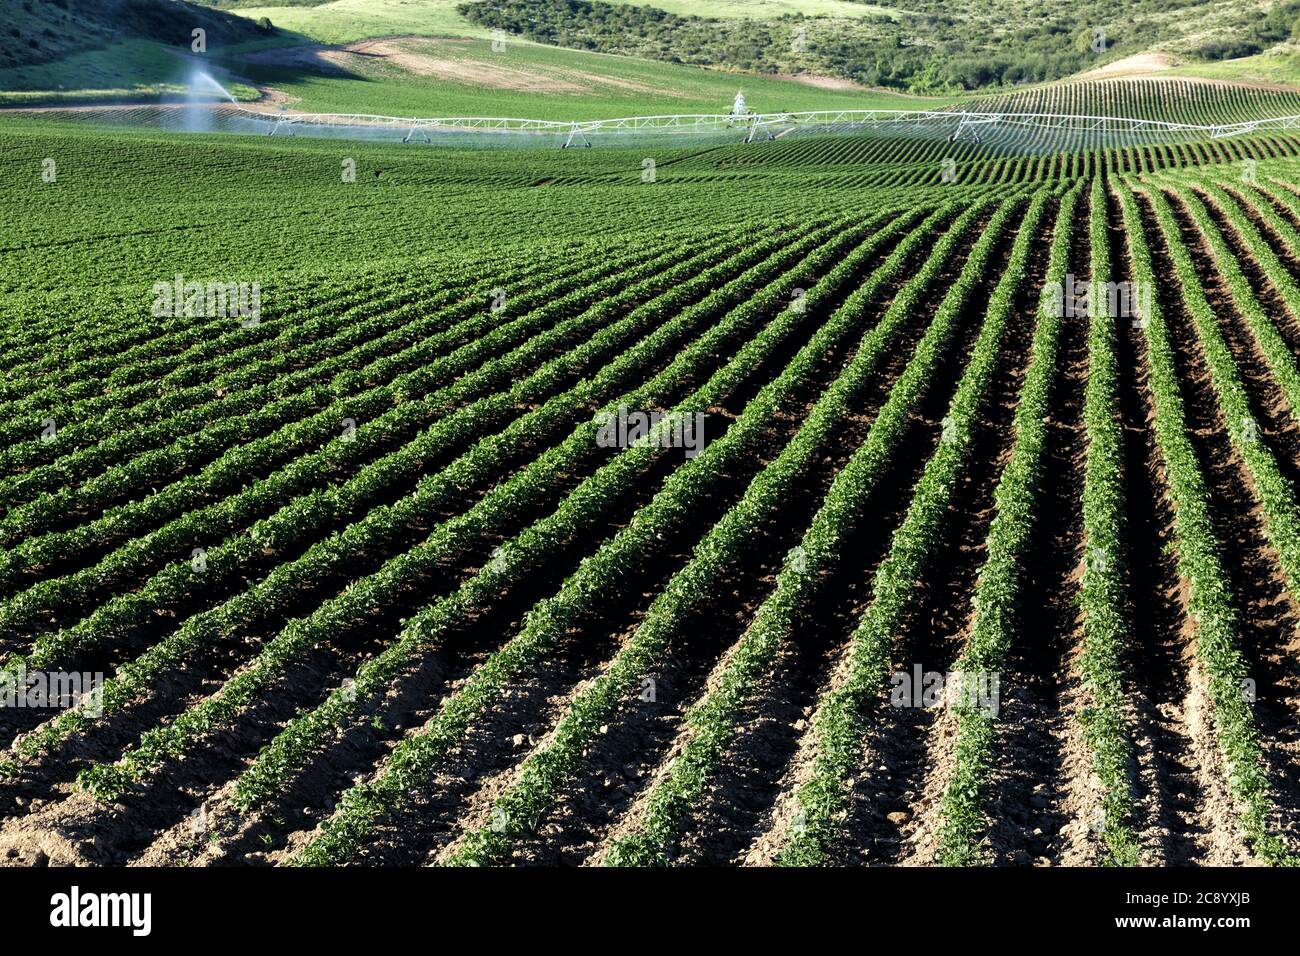 An early morning view of the rows in a field of potatoes in the rolling fertile farm fields of Idaho. Stock Photo